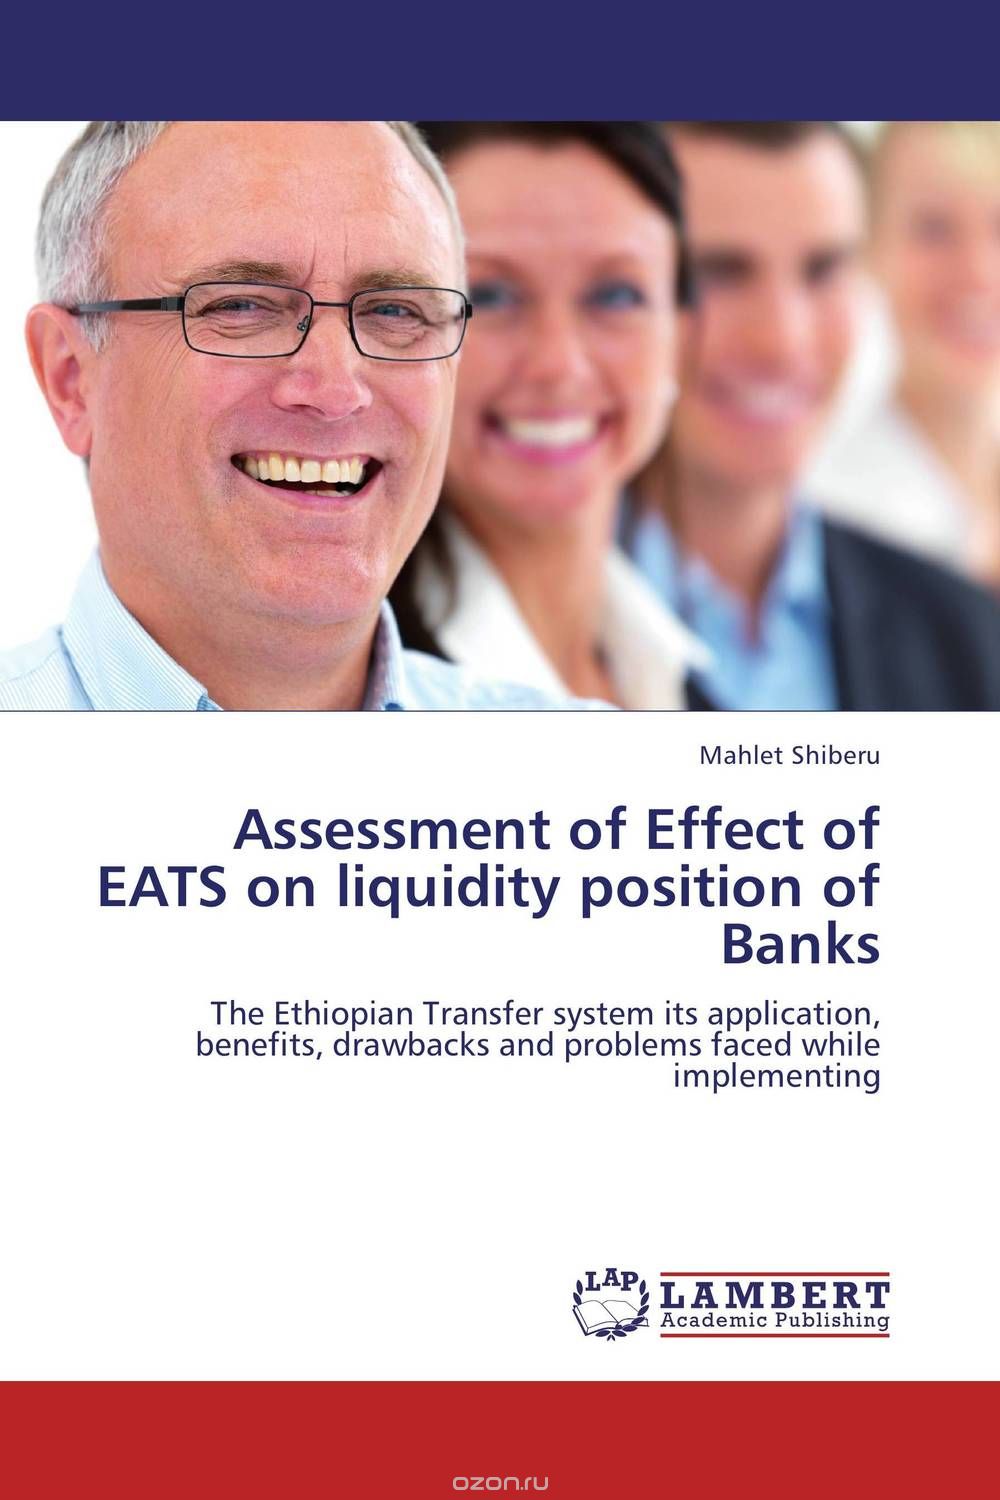 Assessment of Effect of EATS on liquidity position of Banks